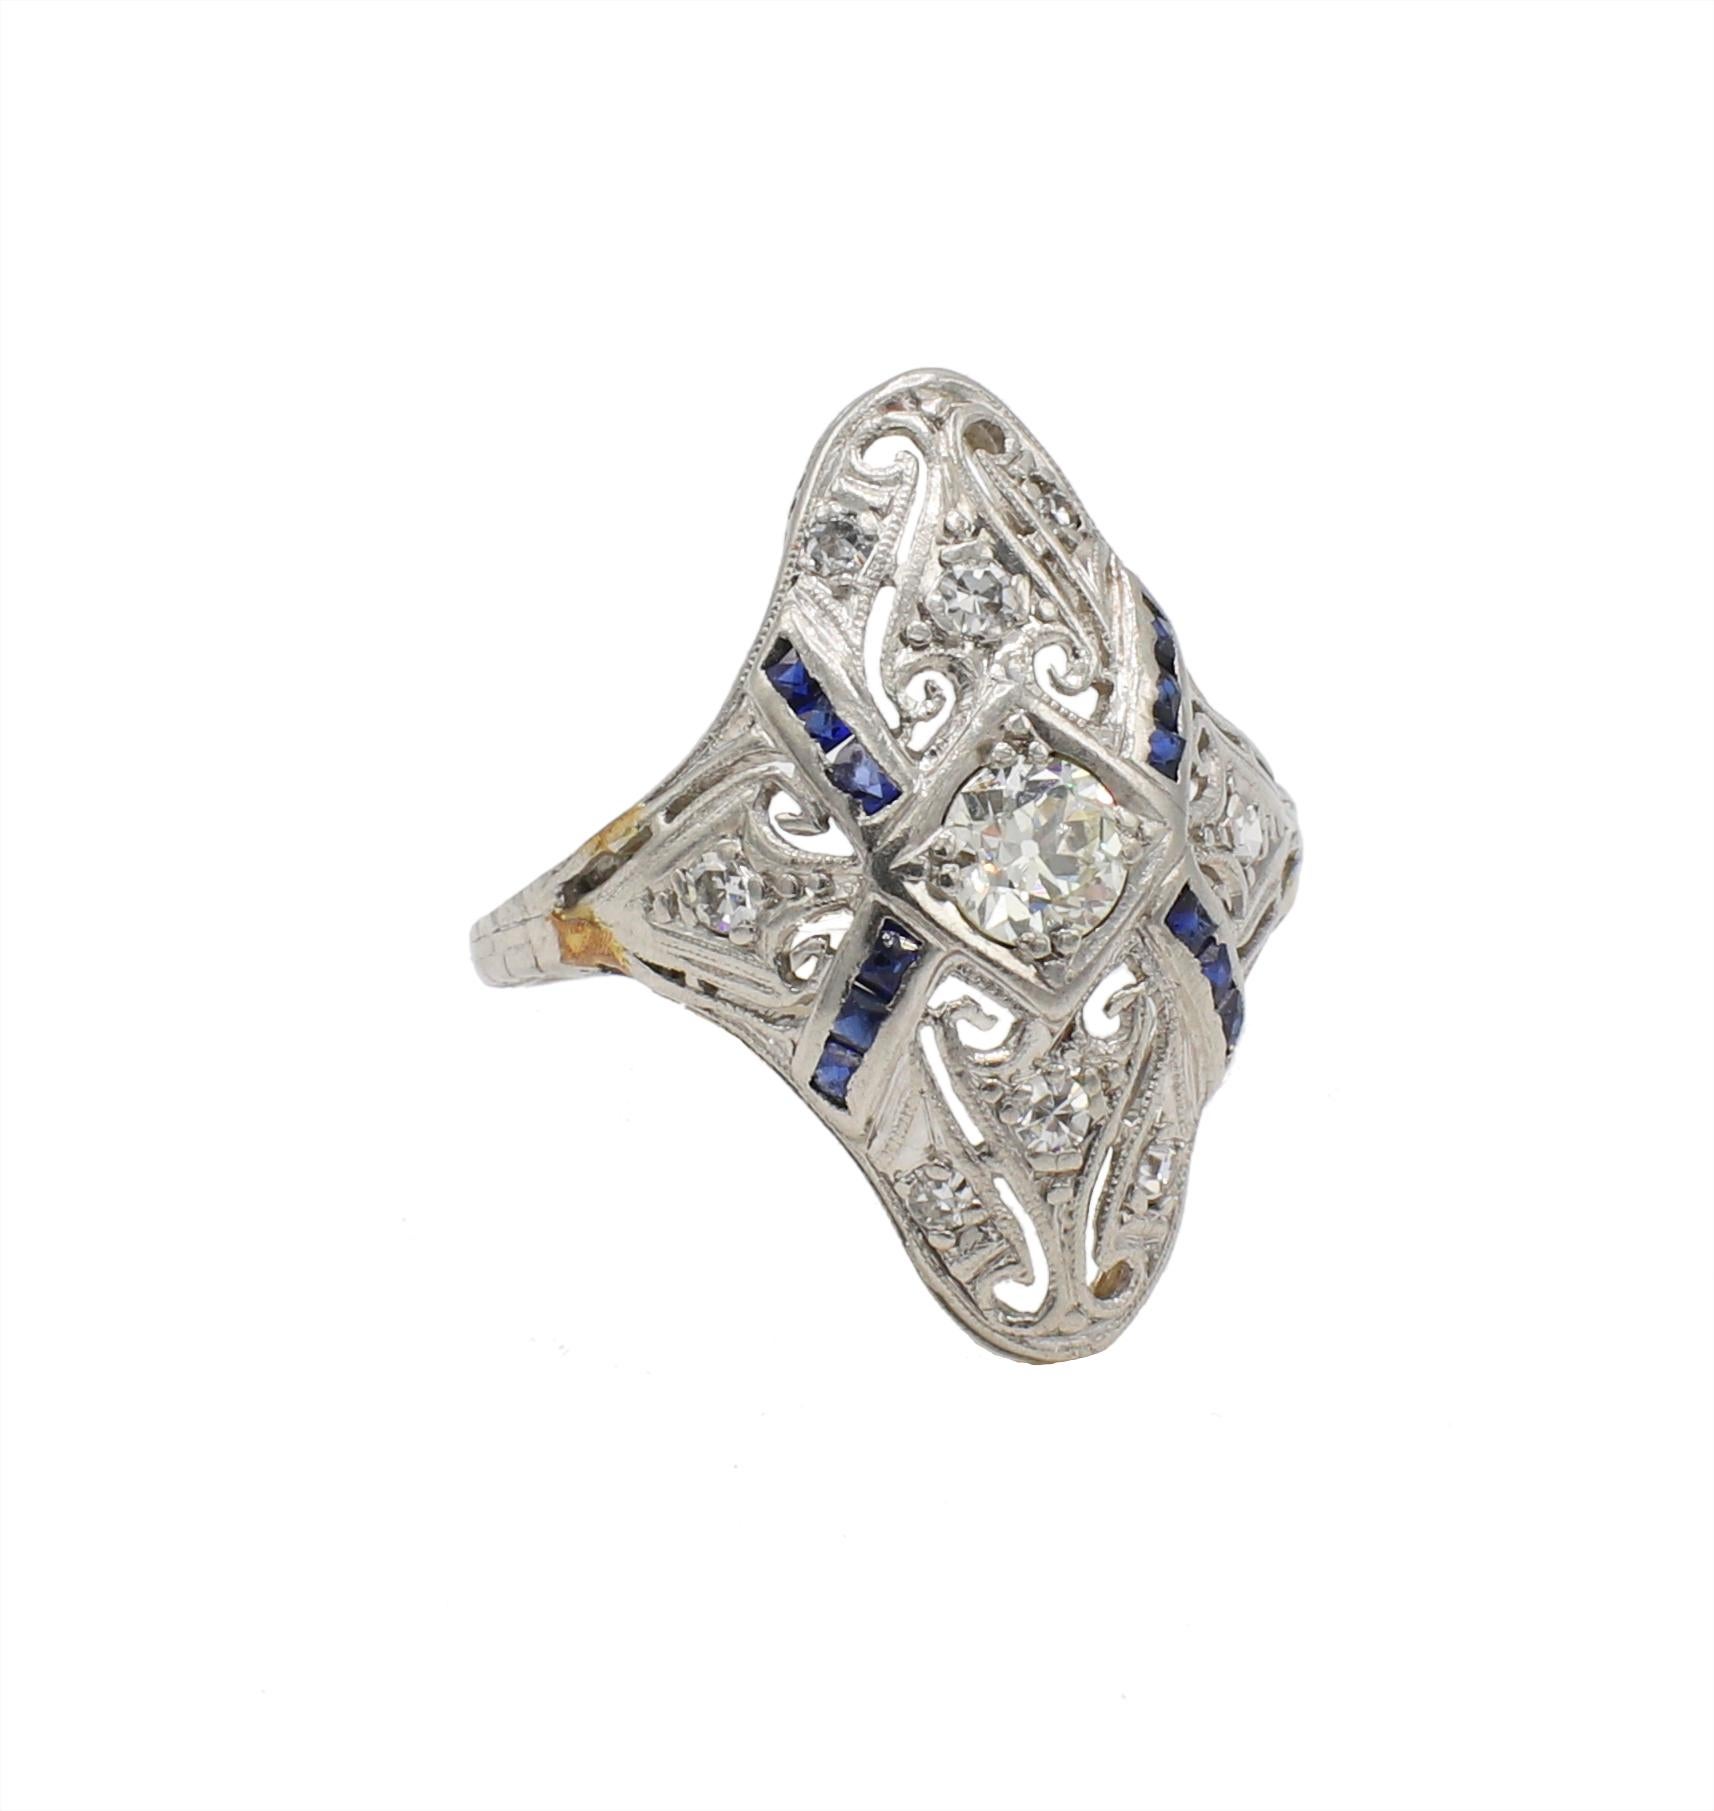 Antique Art Deco Old European Cut Diamond & Sapphire Filigree Navette Ring Size 5
Metal: Platinum
Weight: 3.25 grams
Diamonds: Approx. .30 CTW H-I VS
Sapphires: 12 french cut blue sapphires, approx. .18 CTW, facet junctions are slightly abraded from